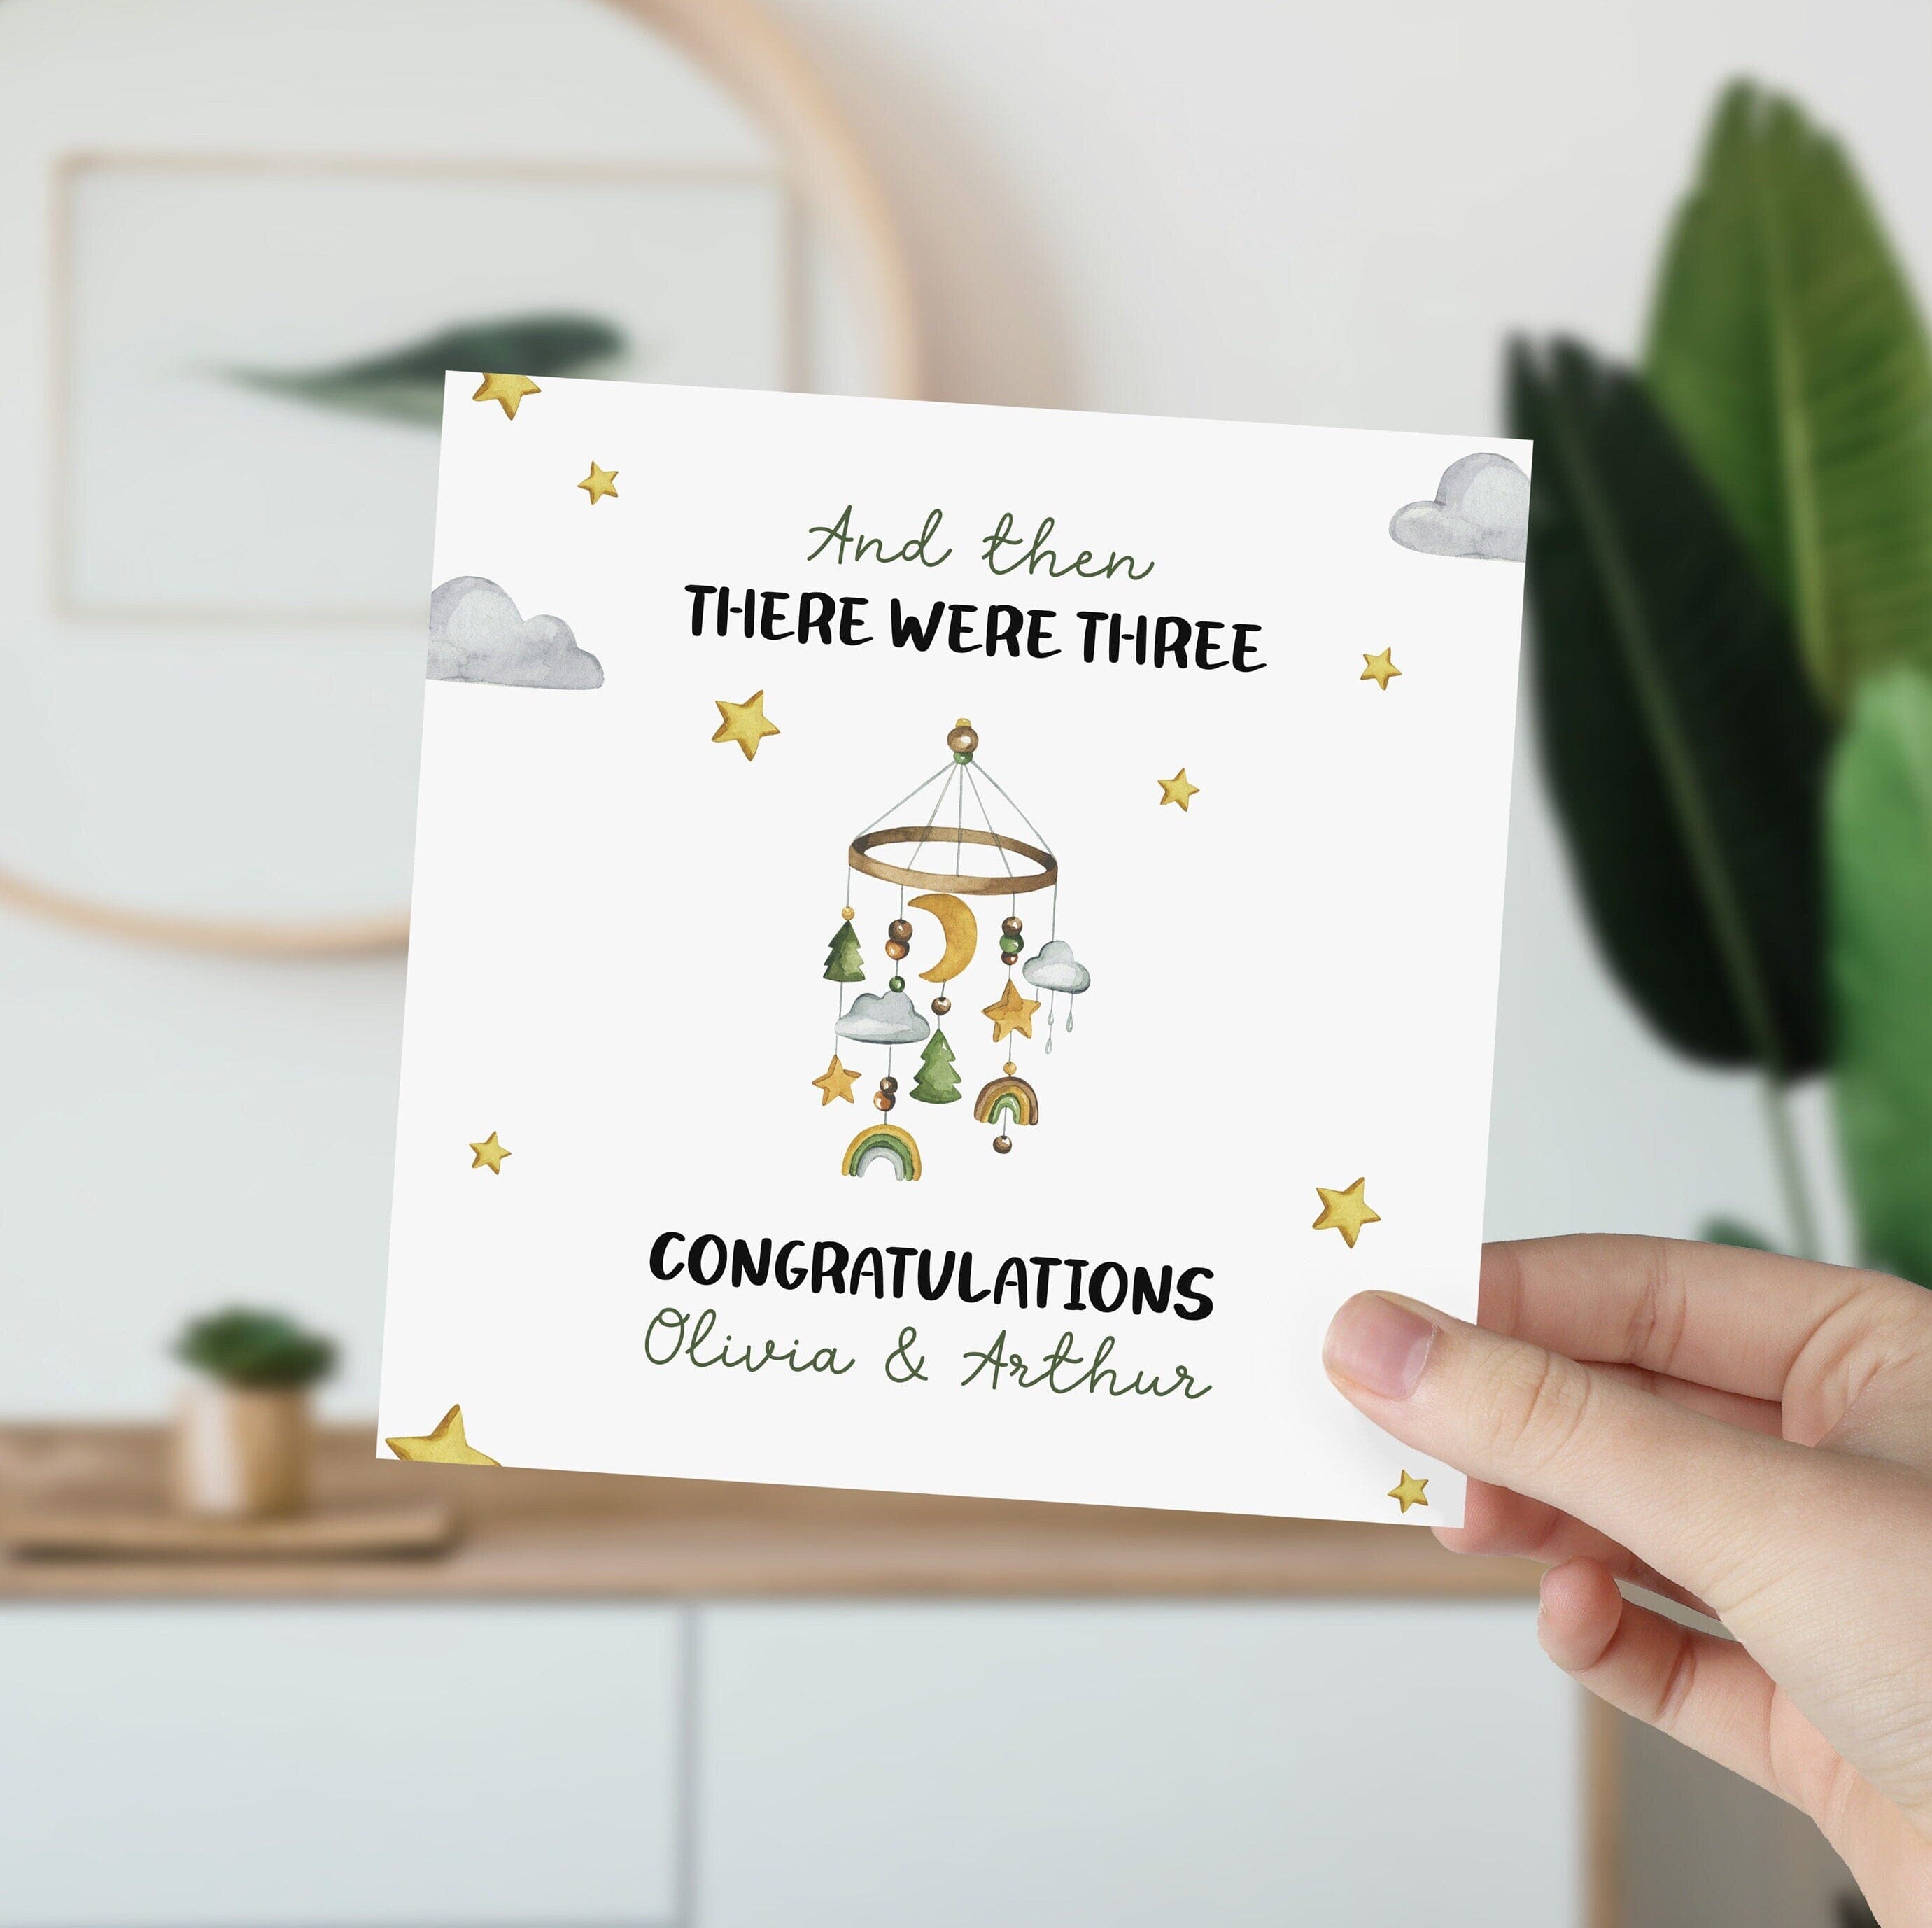 New baby card, Personalised mum dad card, Baby shower greeting card, Welcome to the world